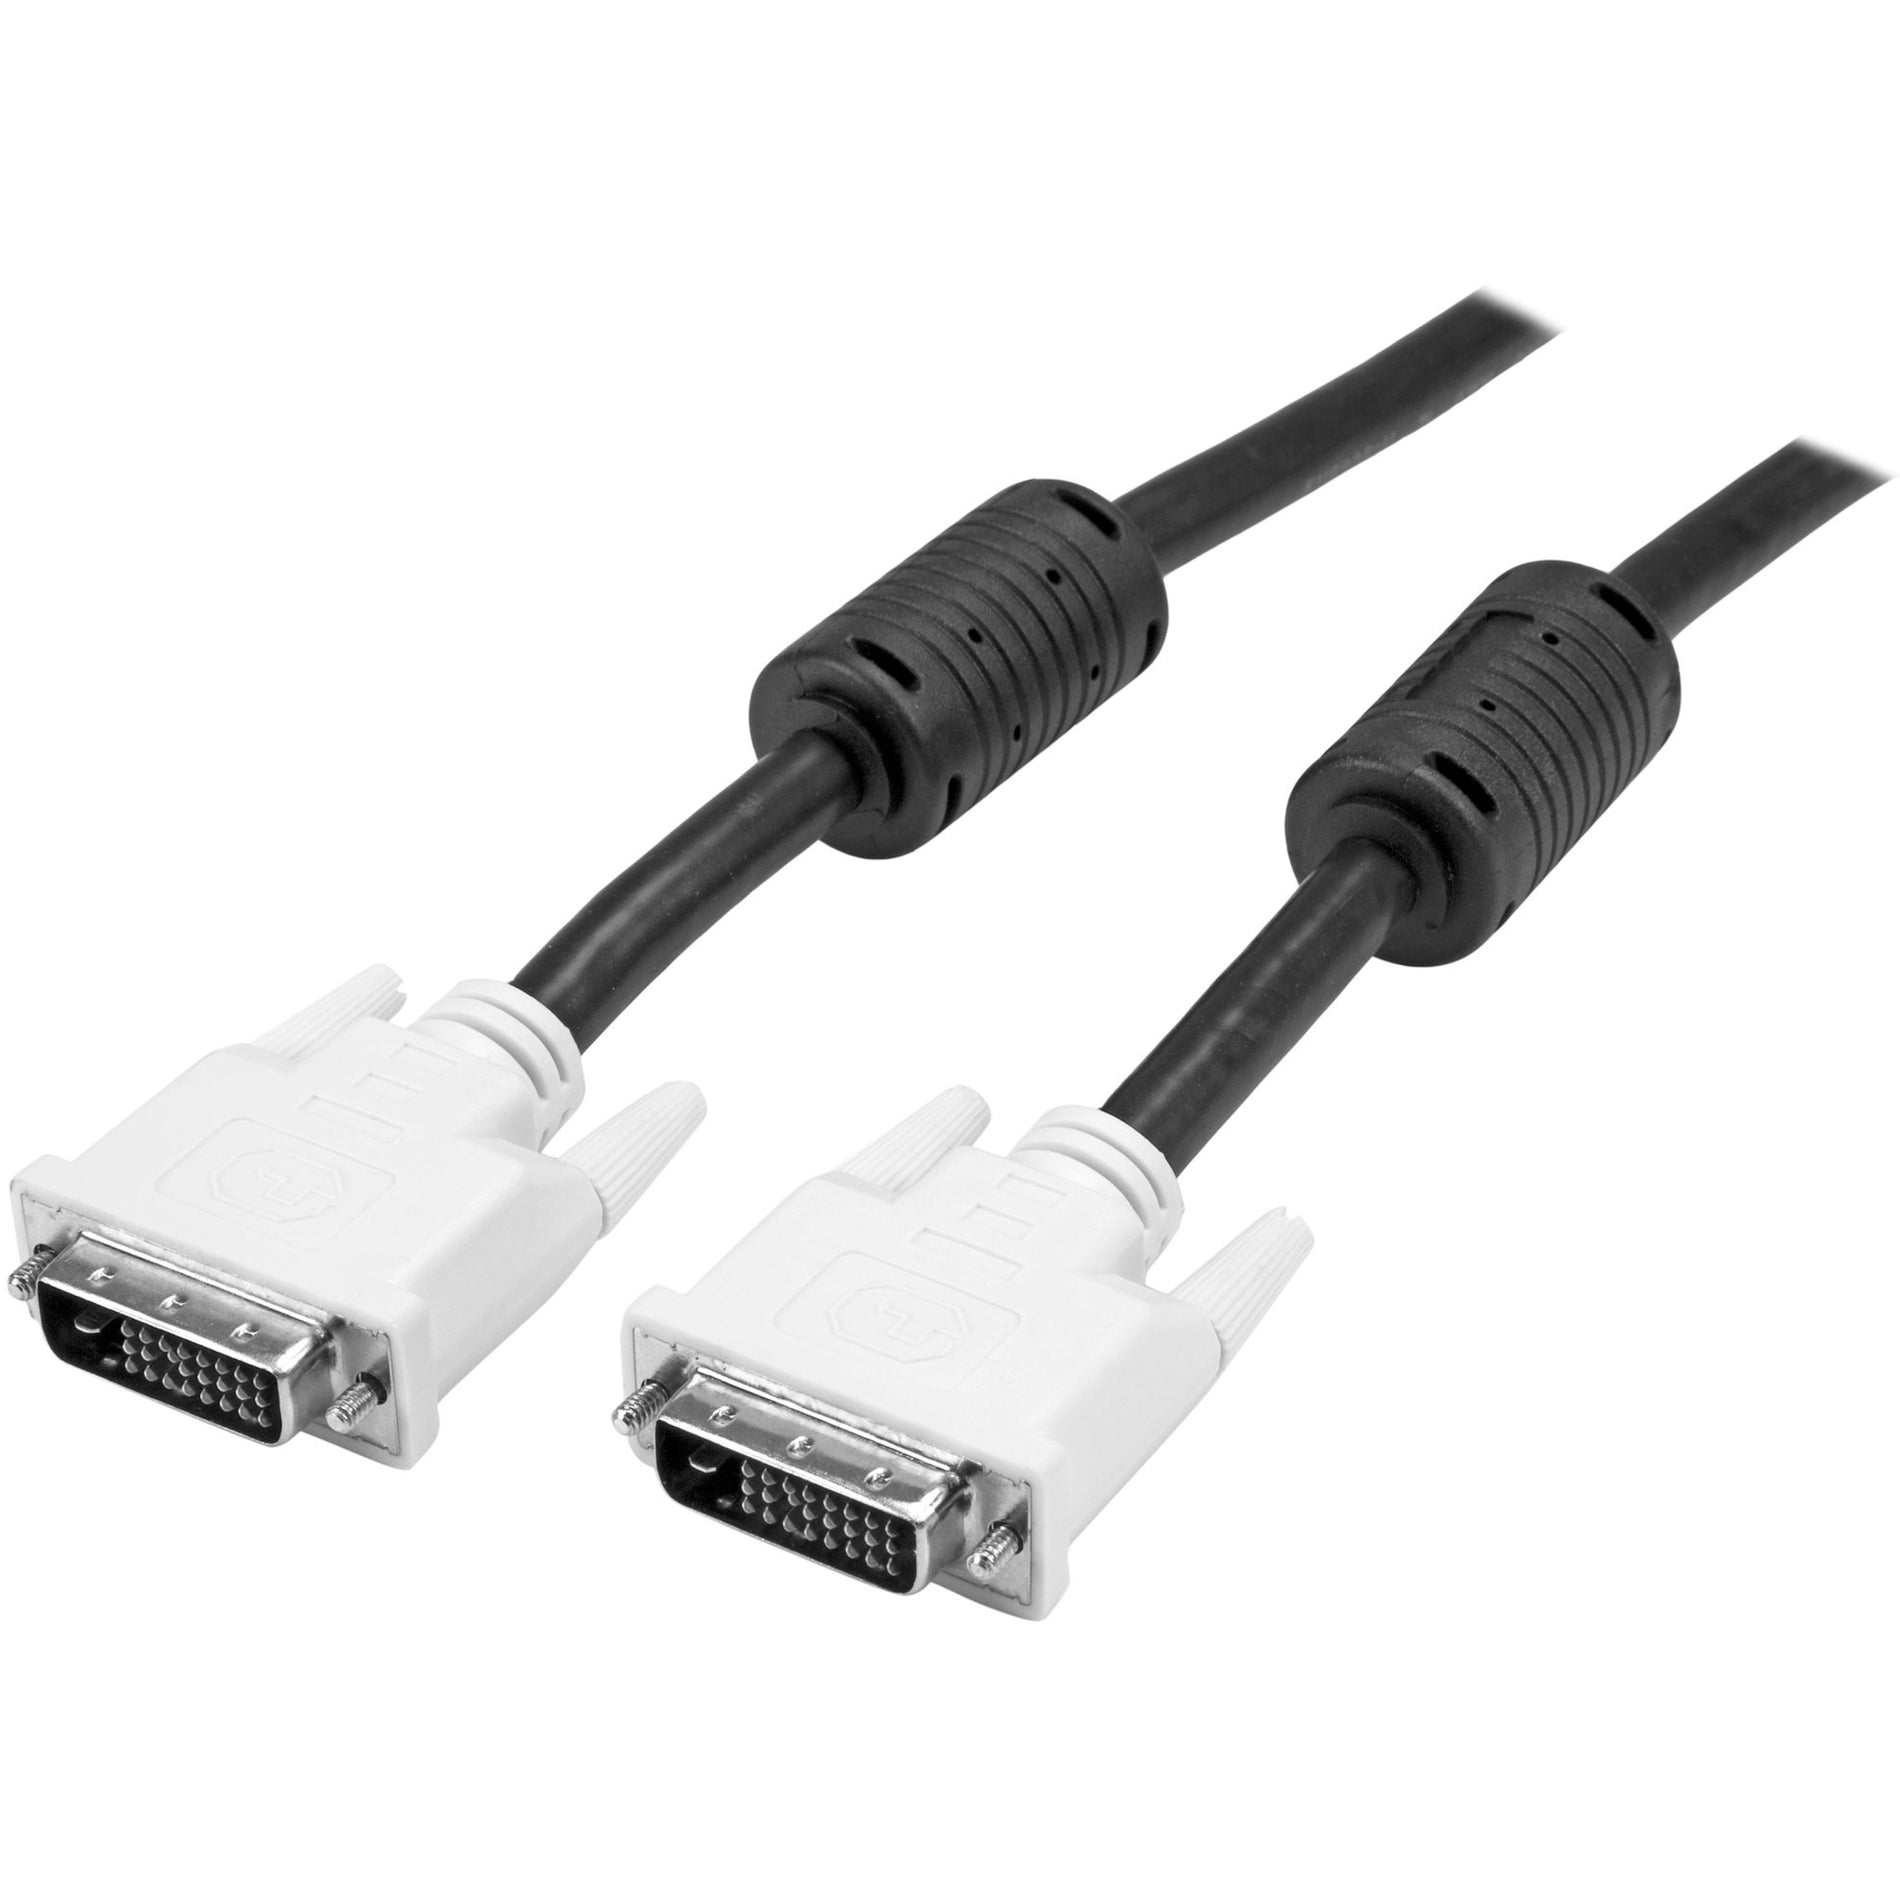 StarTech.com DVIDDMM15 15 ft DVI-D Dual Link Cable - M/M, High-Speed Video Cable for Displays, Projectors, and HDTVs